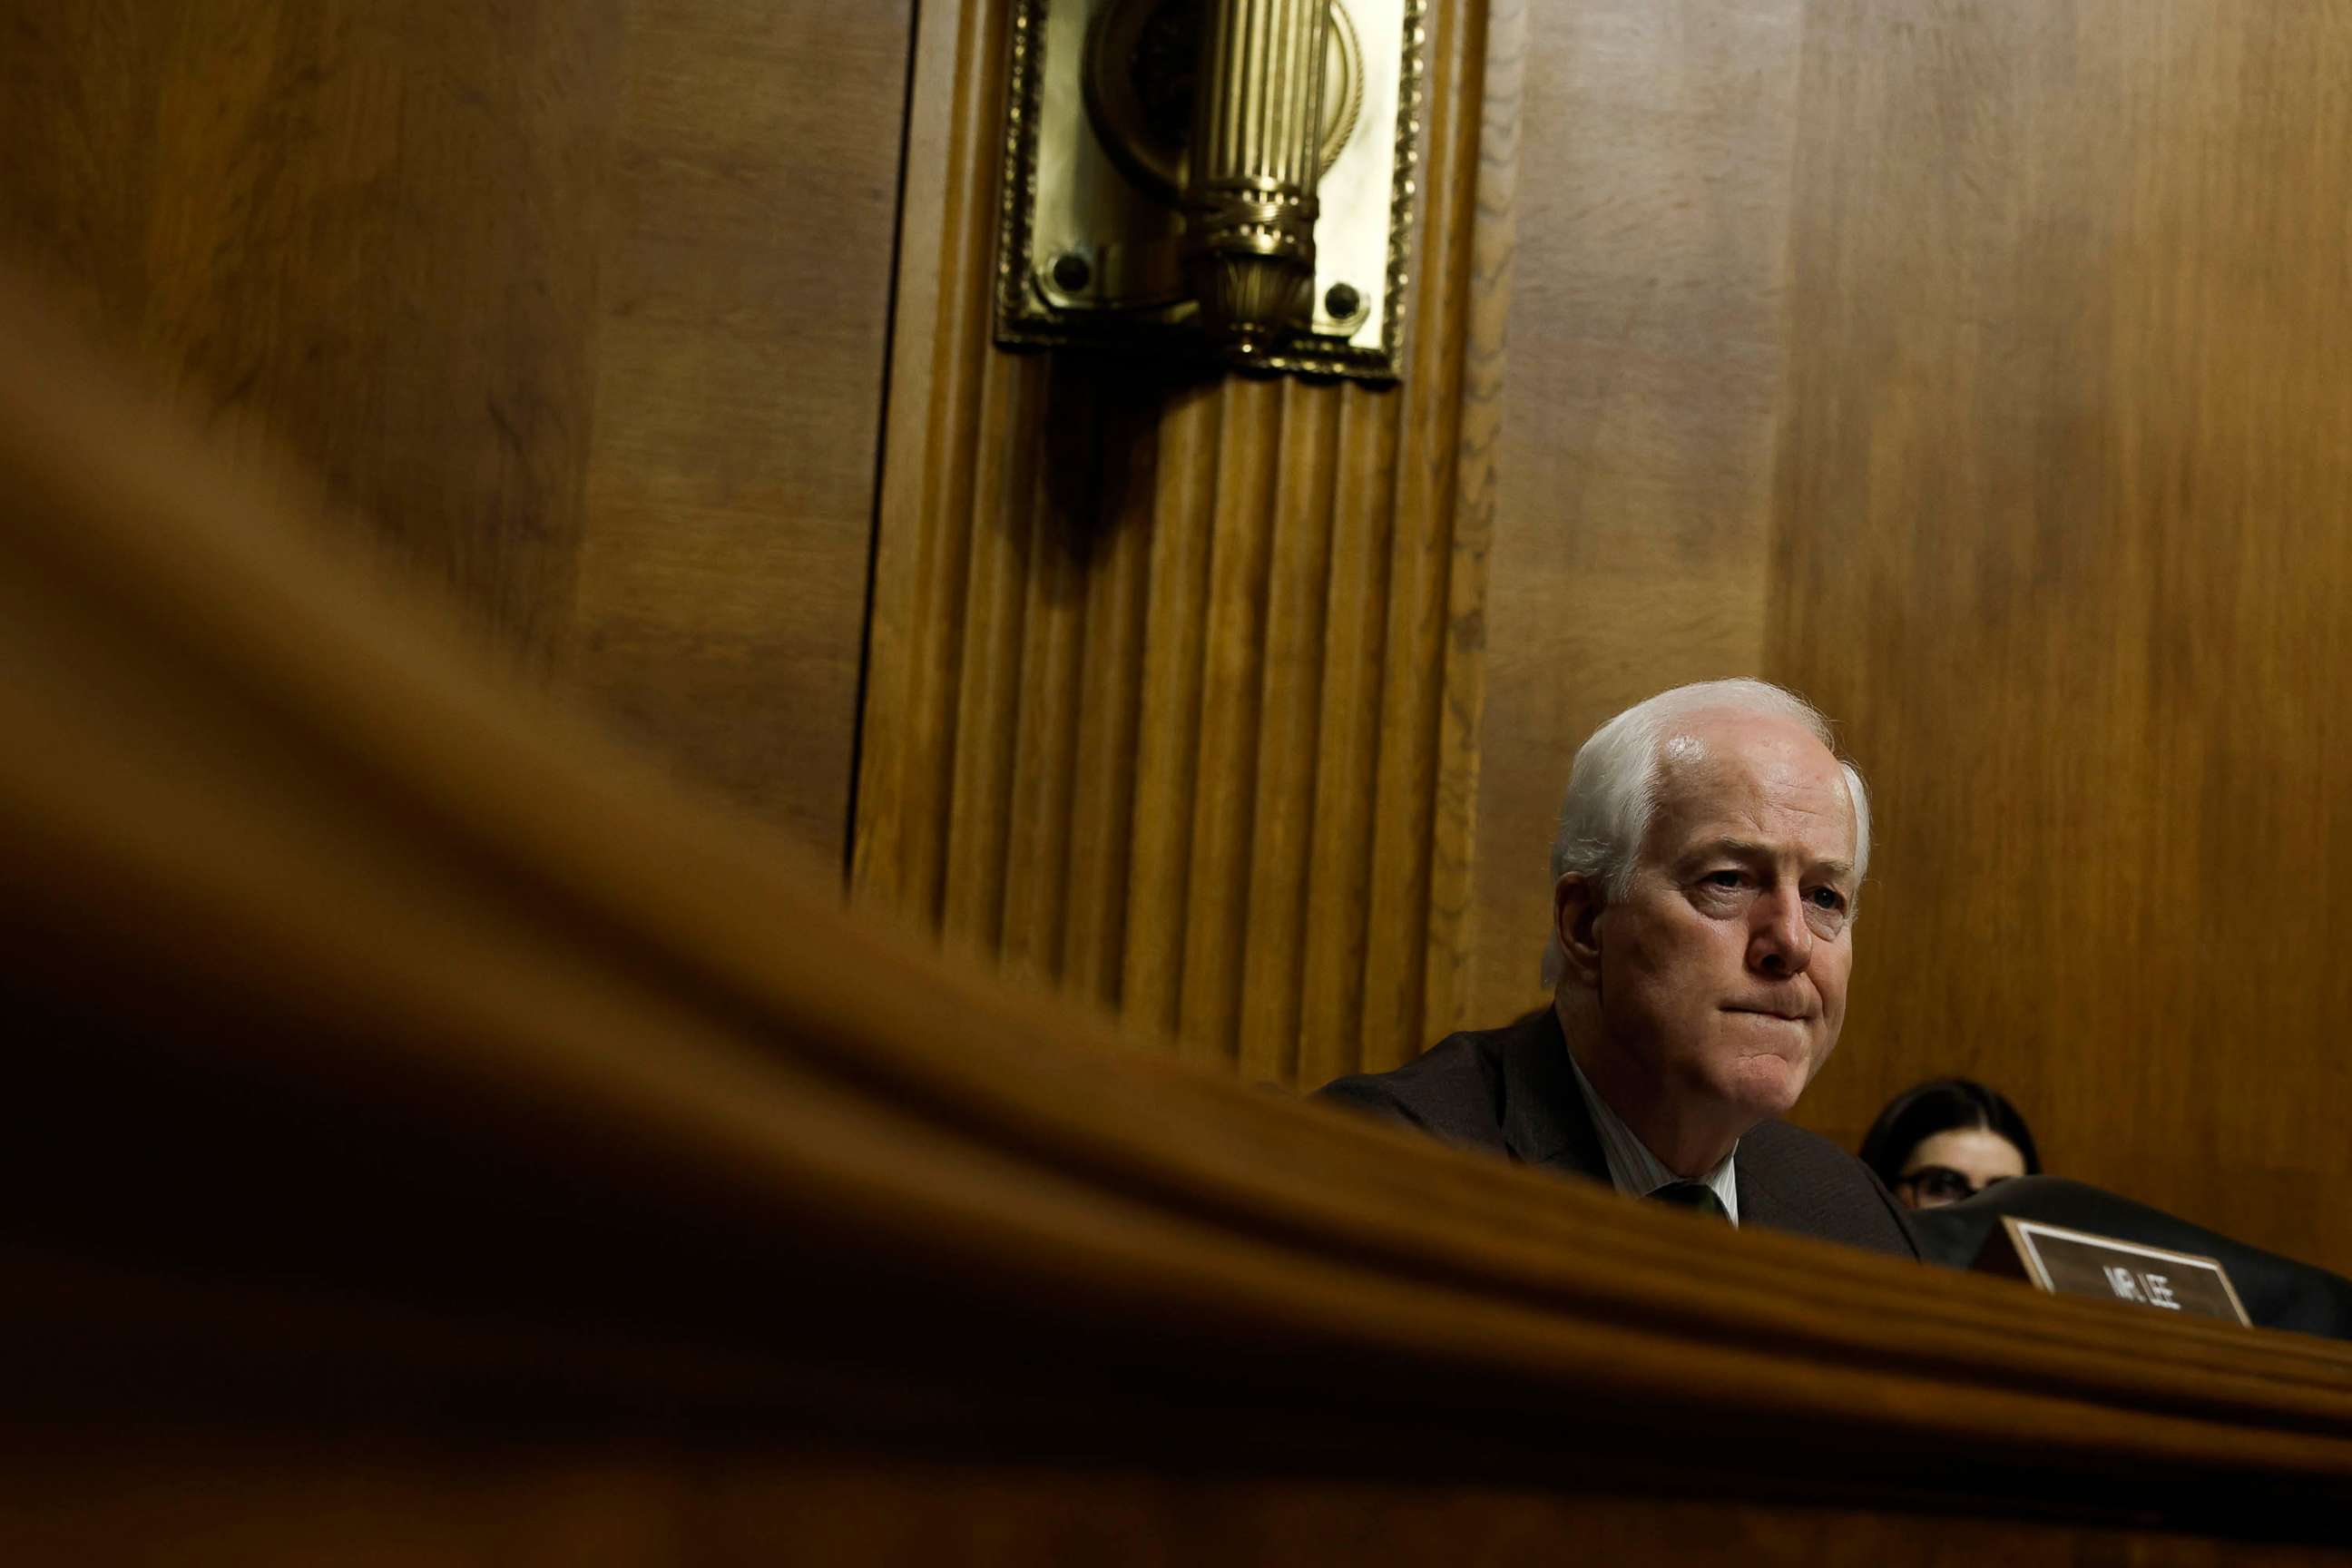 PHOTO: Sen. John Cornyn speaks during a hearing on "Protecting America's Children From Gun Violence" with the Senate Judiciary Committee in Washington, June 15, 2022.